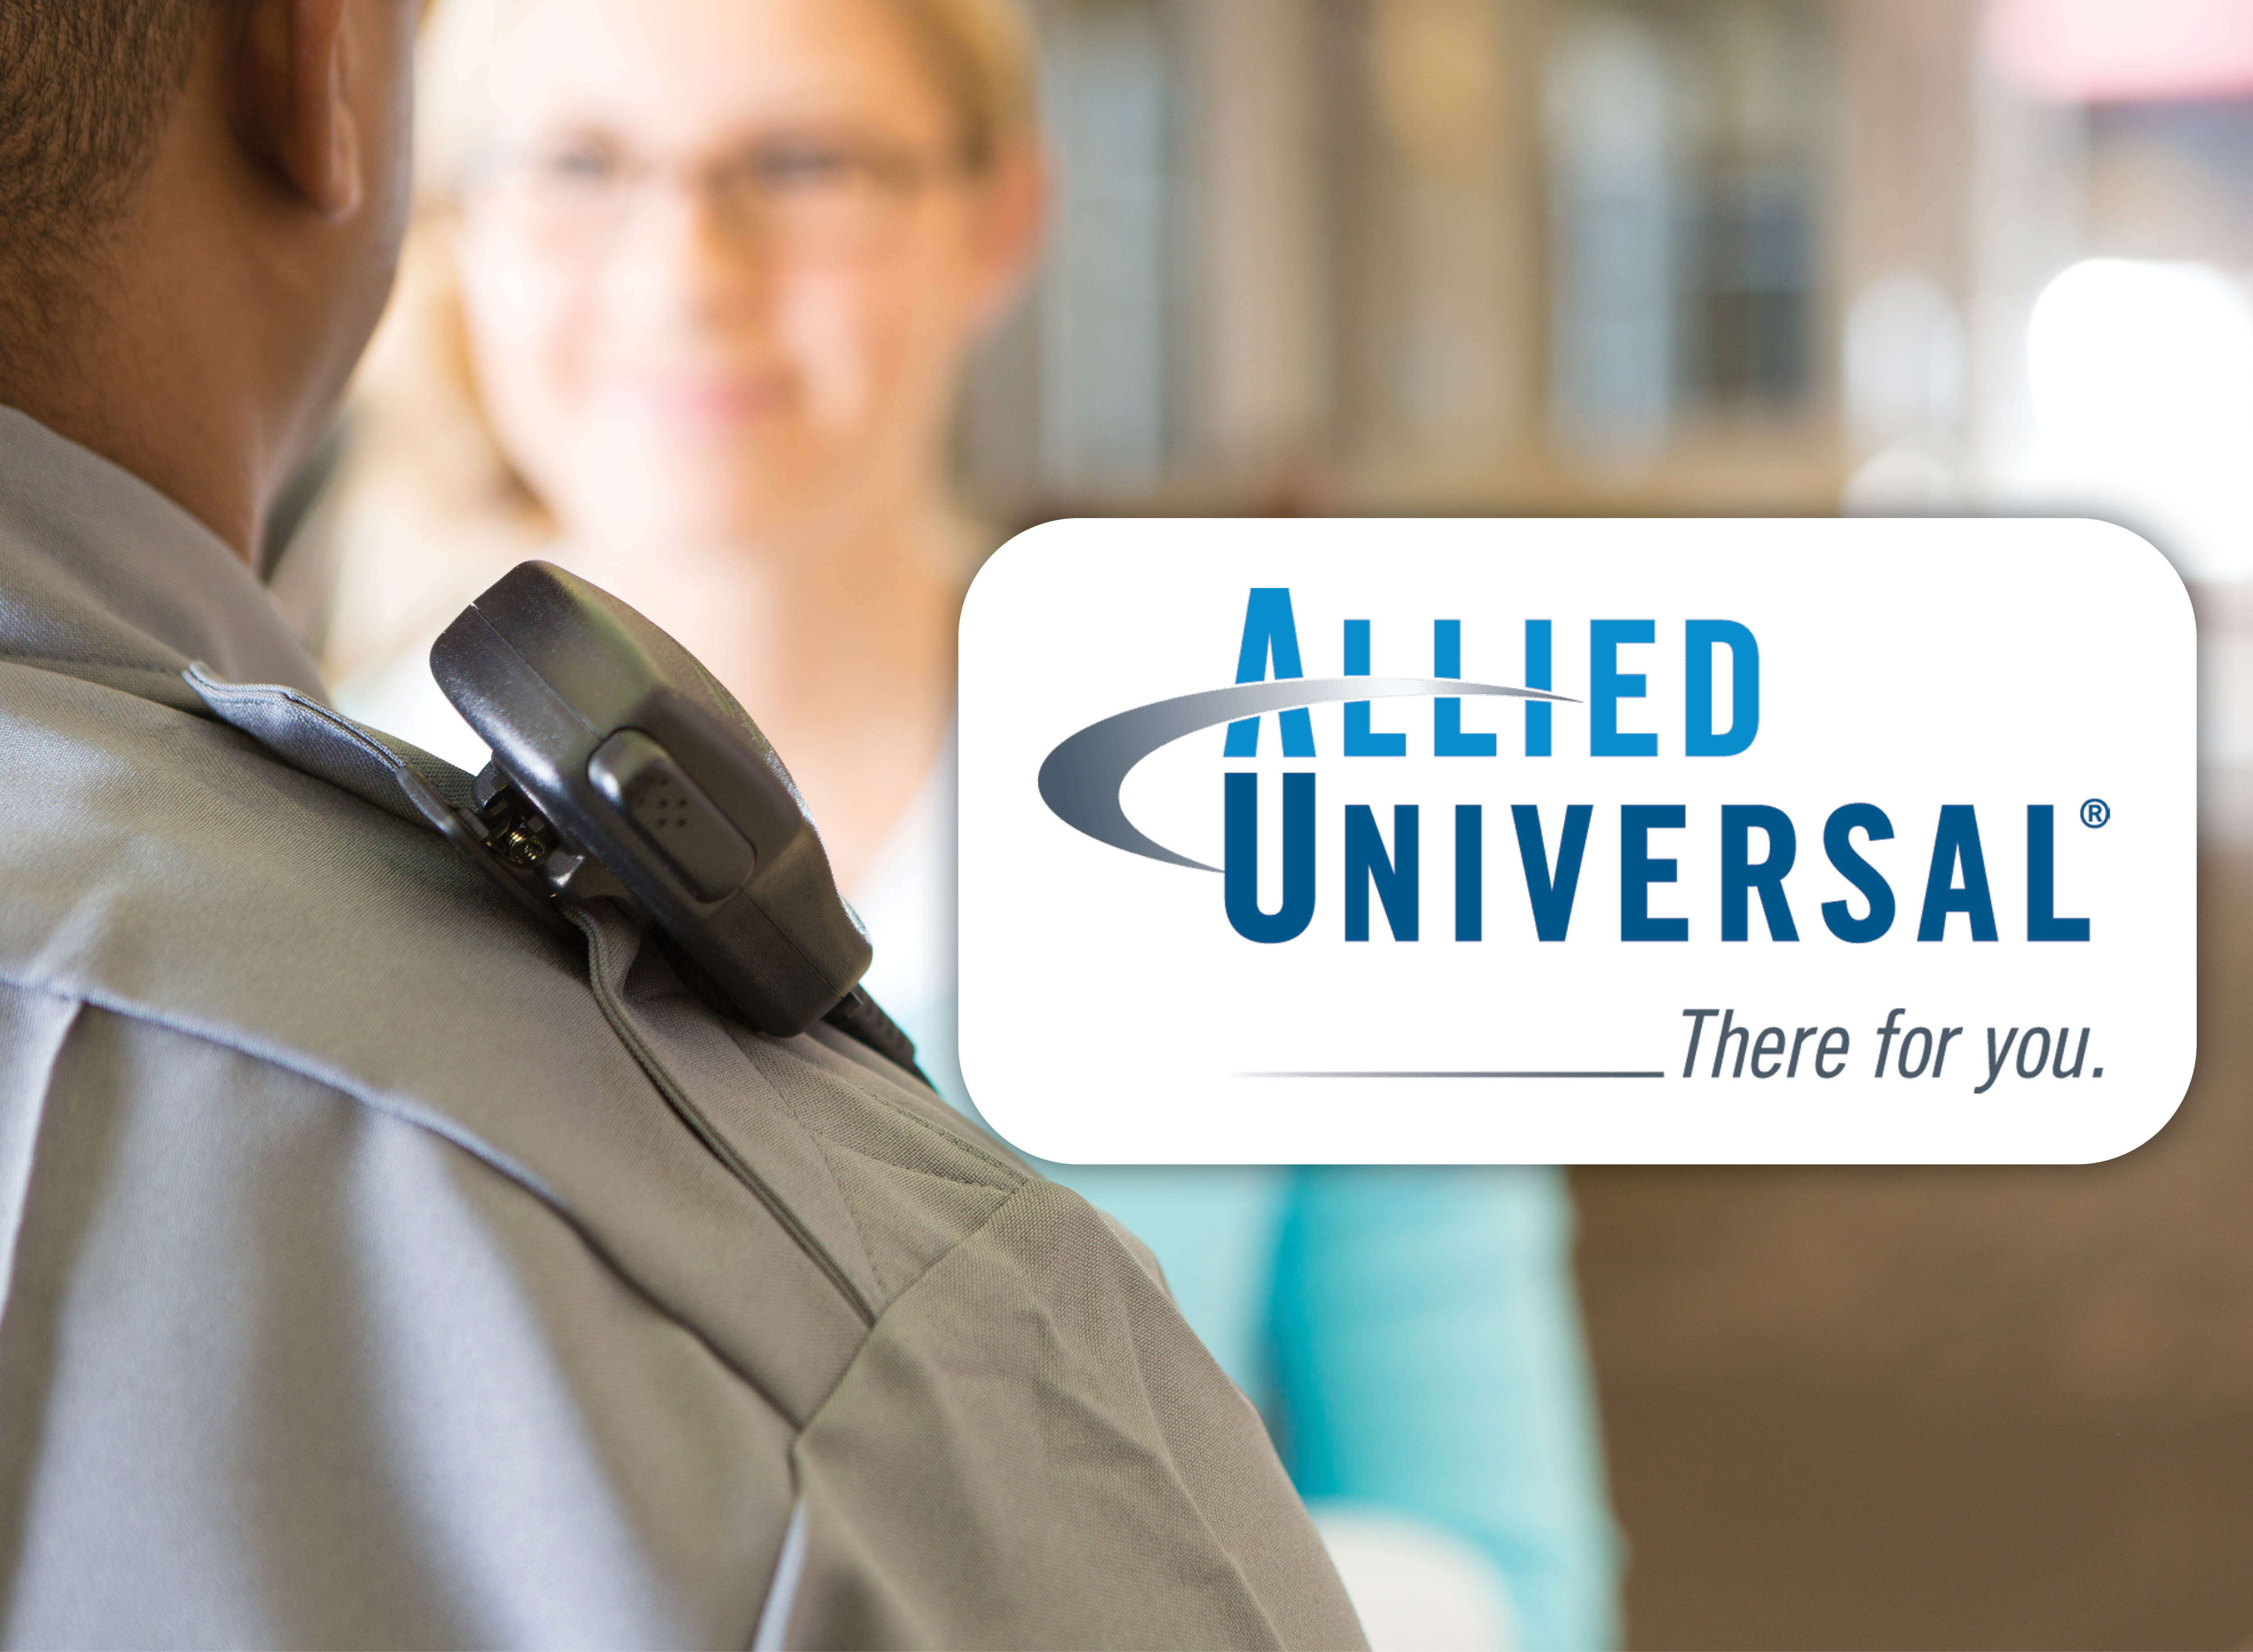 A security officer speaking with a student in the background, next to the Allied Universal logo.